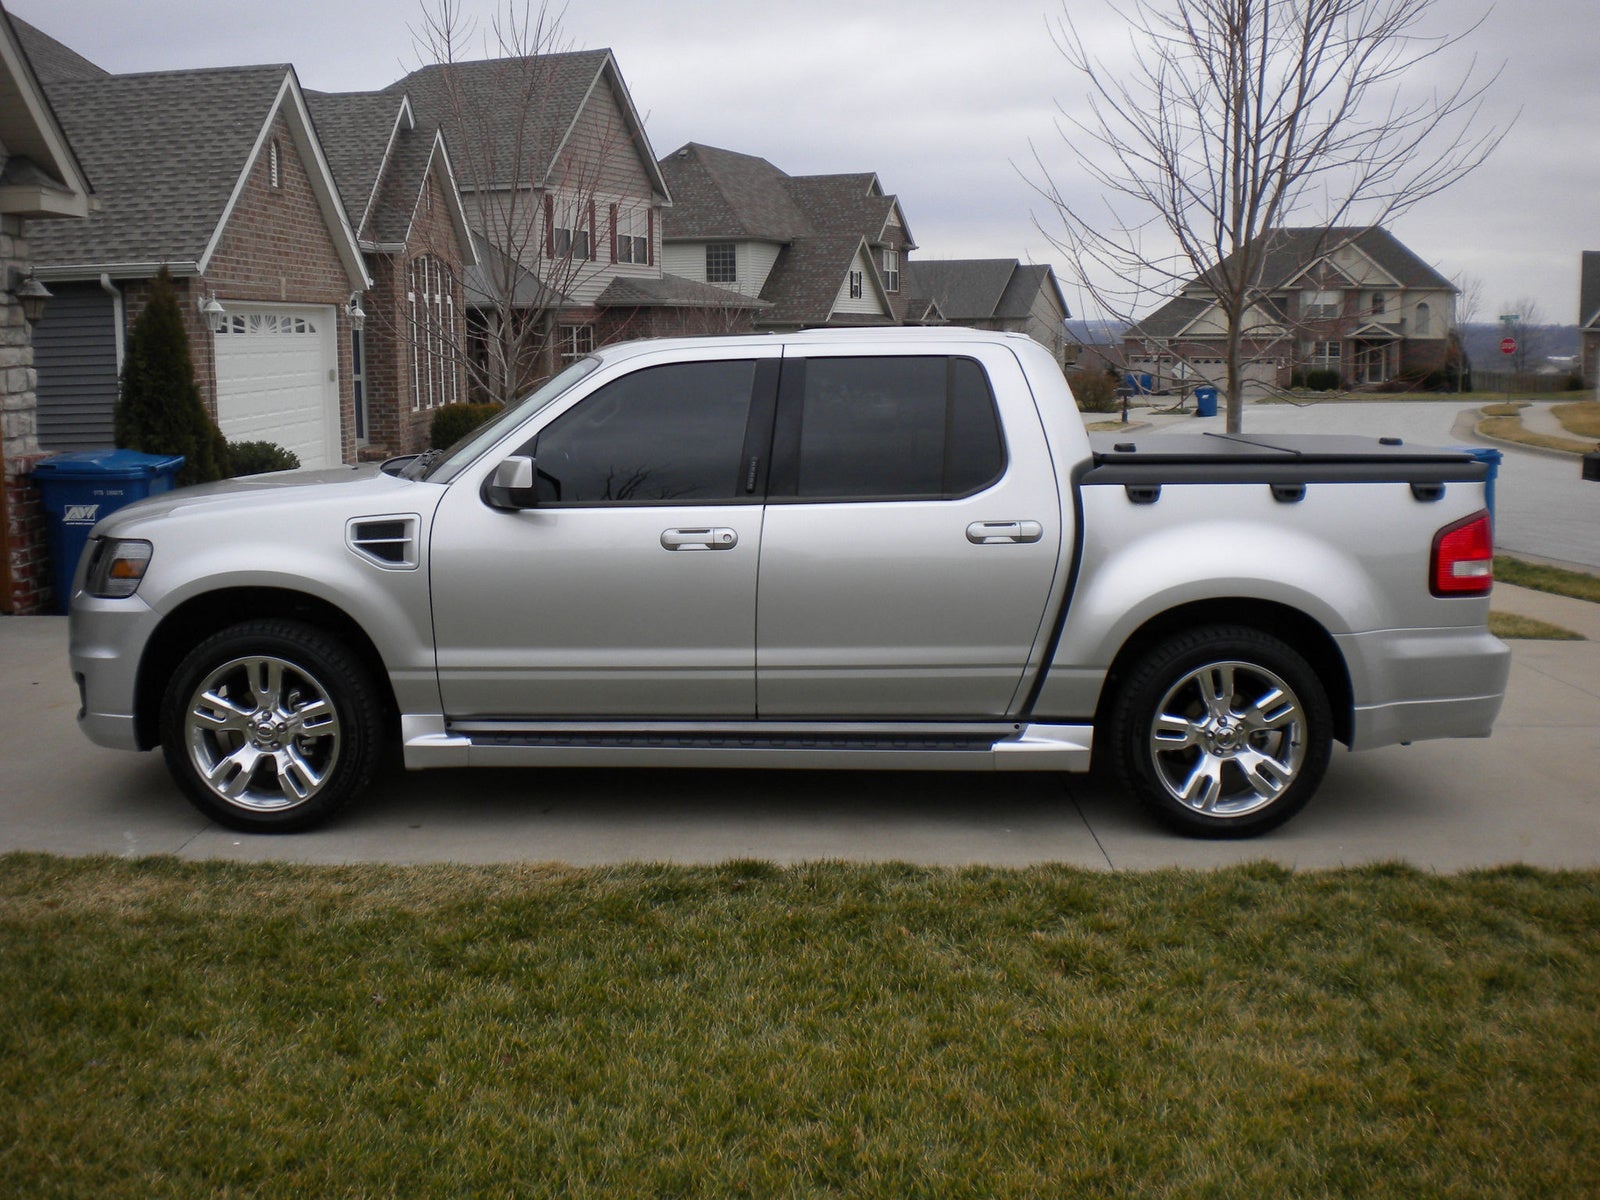 2010 Ford explorer sport trac adrenalin package #4